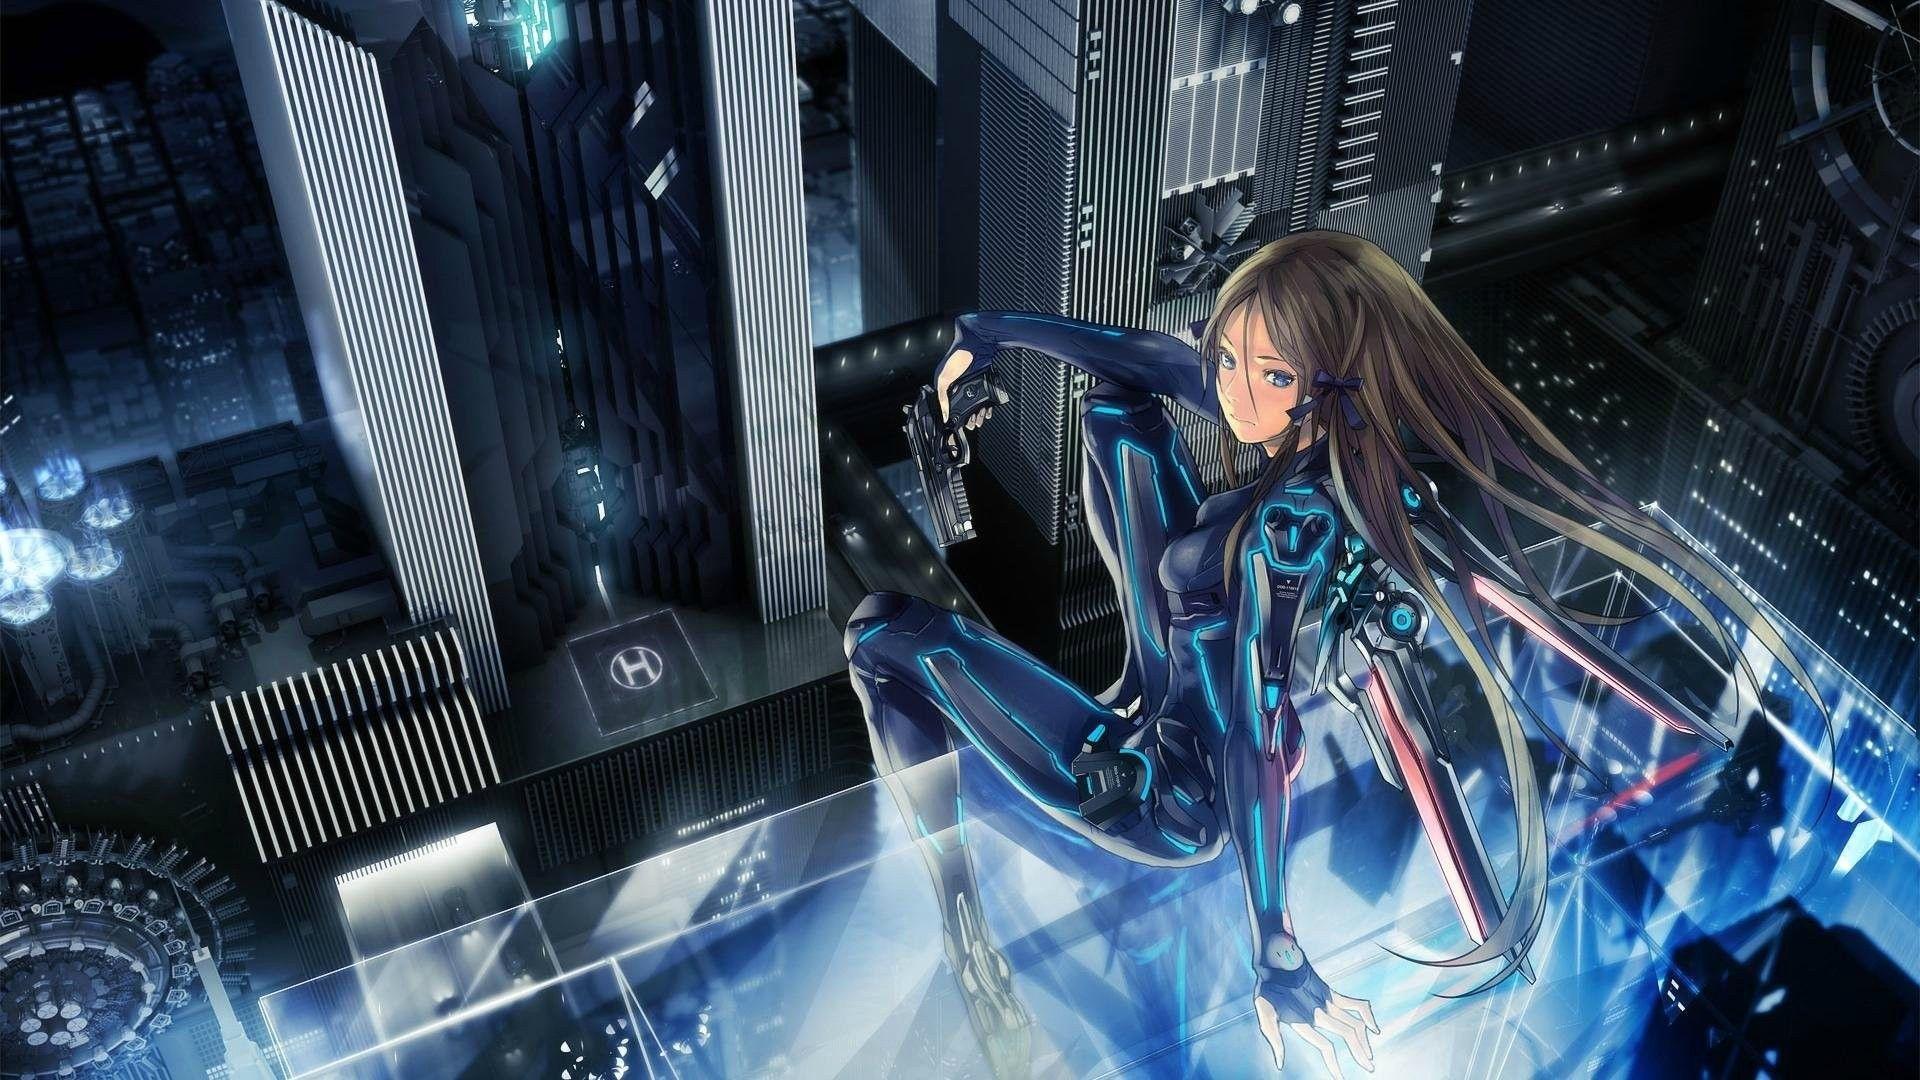 Anime Sci Fi Wallpapers Top Free Anime Sci Fi Backgrounds